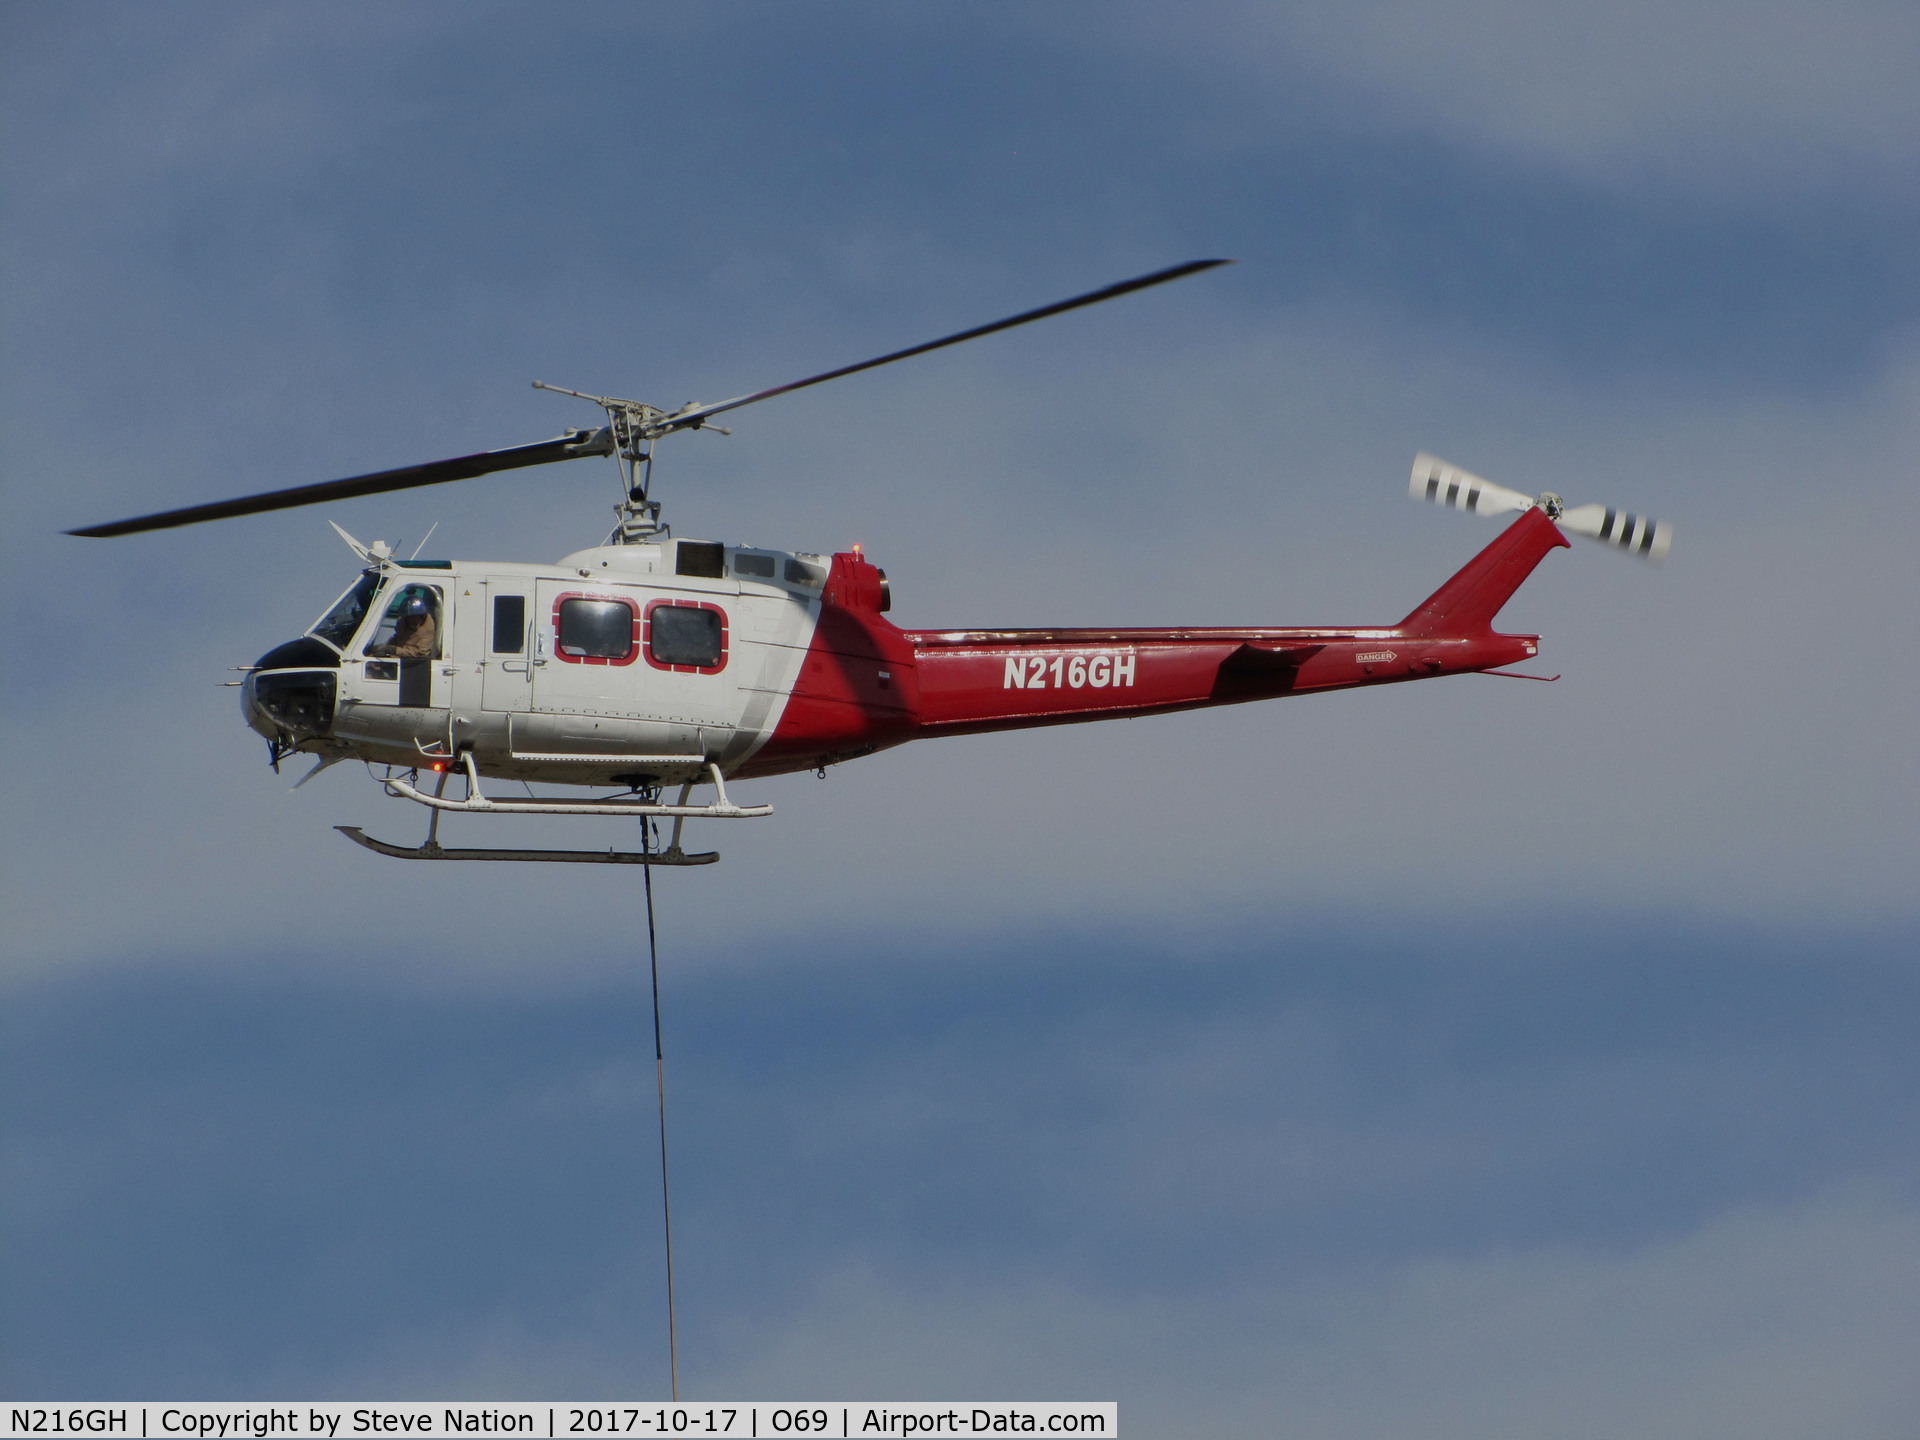 N216GH, 1969 Bell 205A-1++ C/N 30036, Rotorcraft Support Inc. (Van Nuys, CA) 1969 Bell 205A-1 returning to Petaluma Municipal Airport, CA temporary home base from making water drops on the devastating October 2017 Northern California wildfires